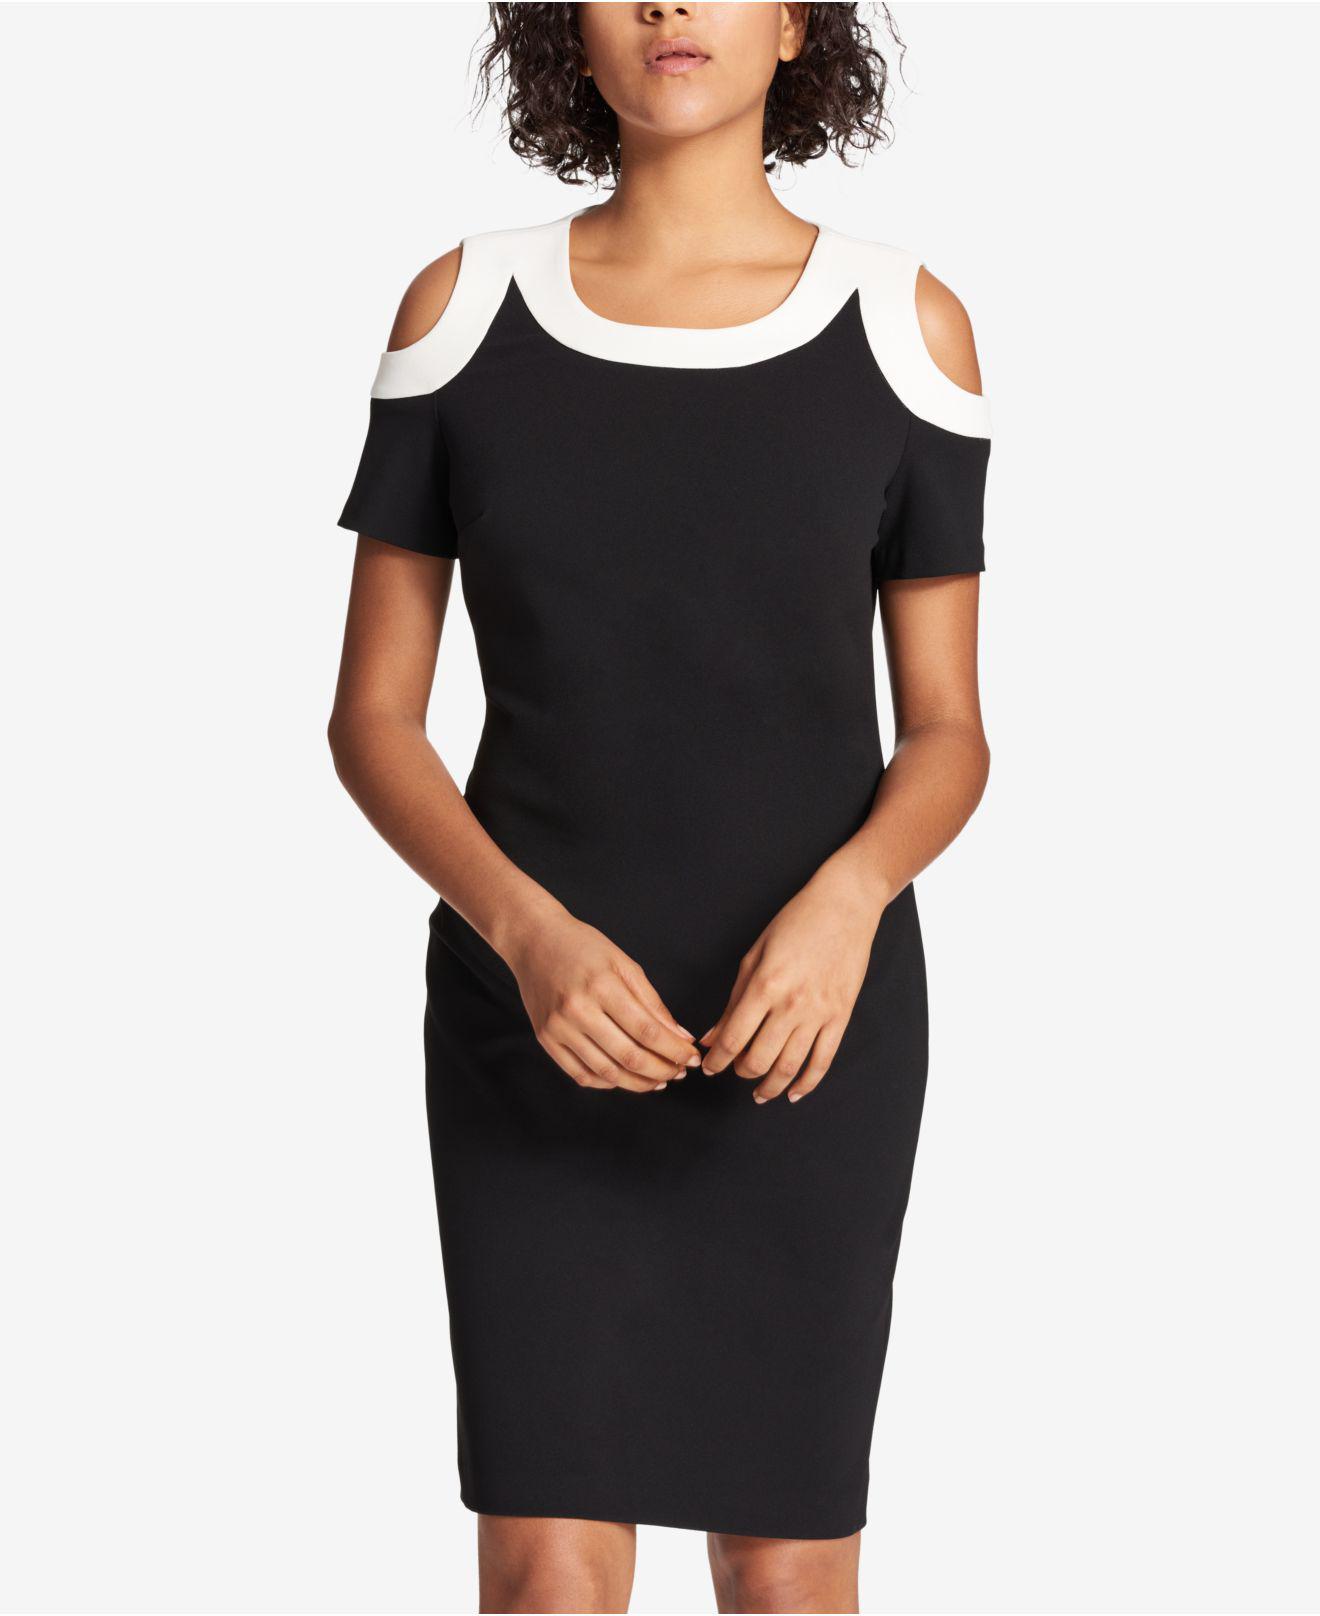 black and white tommy hilfiger dress